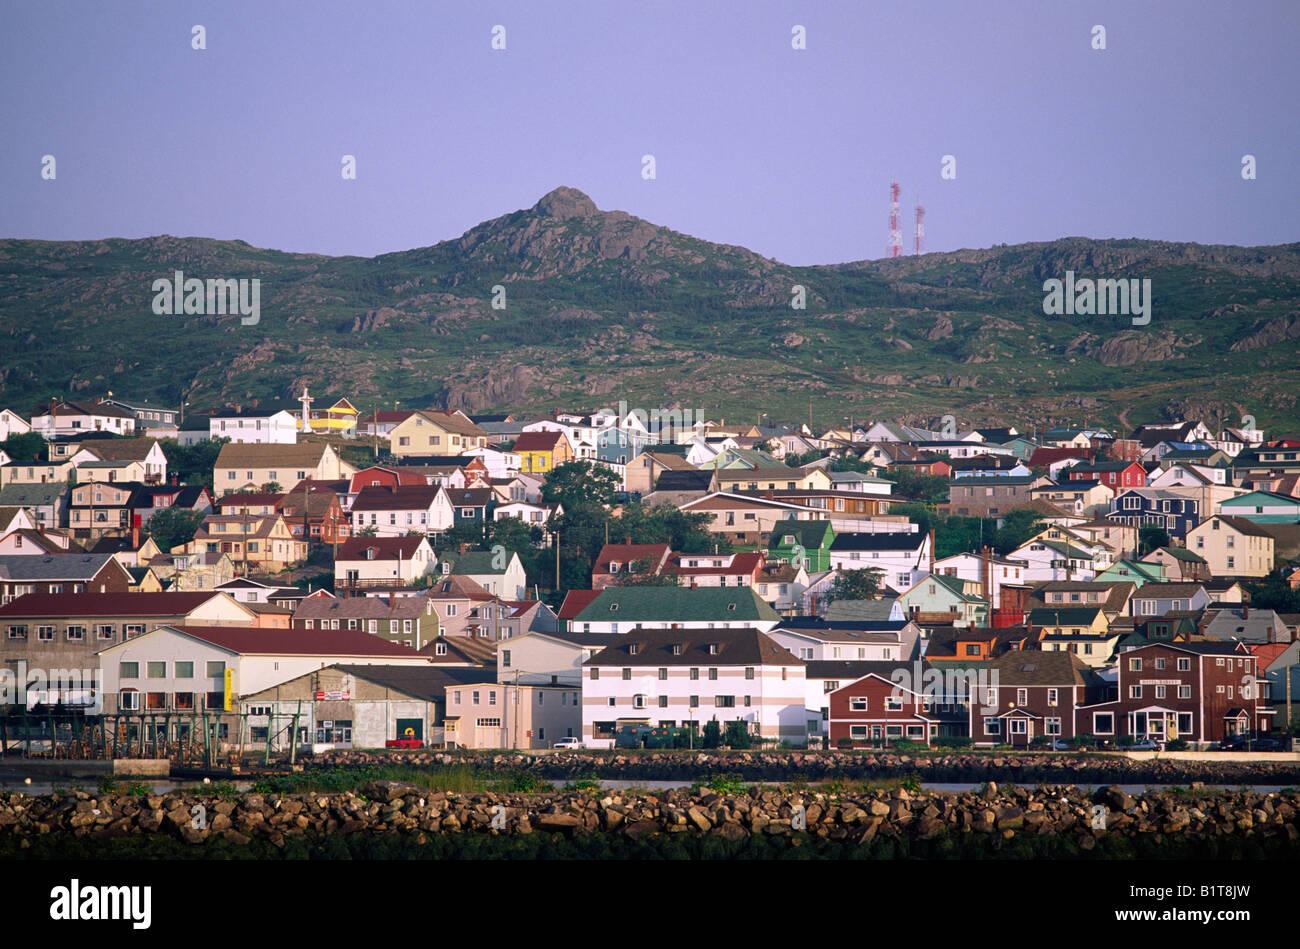 The town of St. Pierre as seen from the harbor, the French territory of St. Pierre et Miquelon Stock Photo